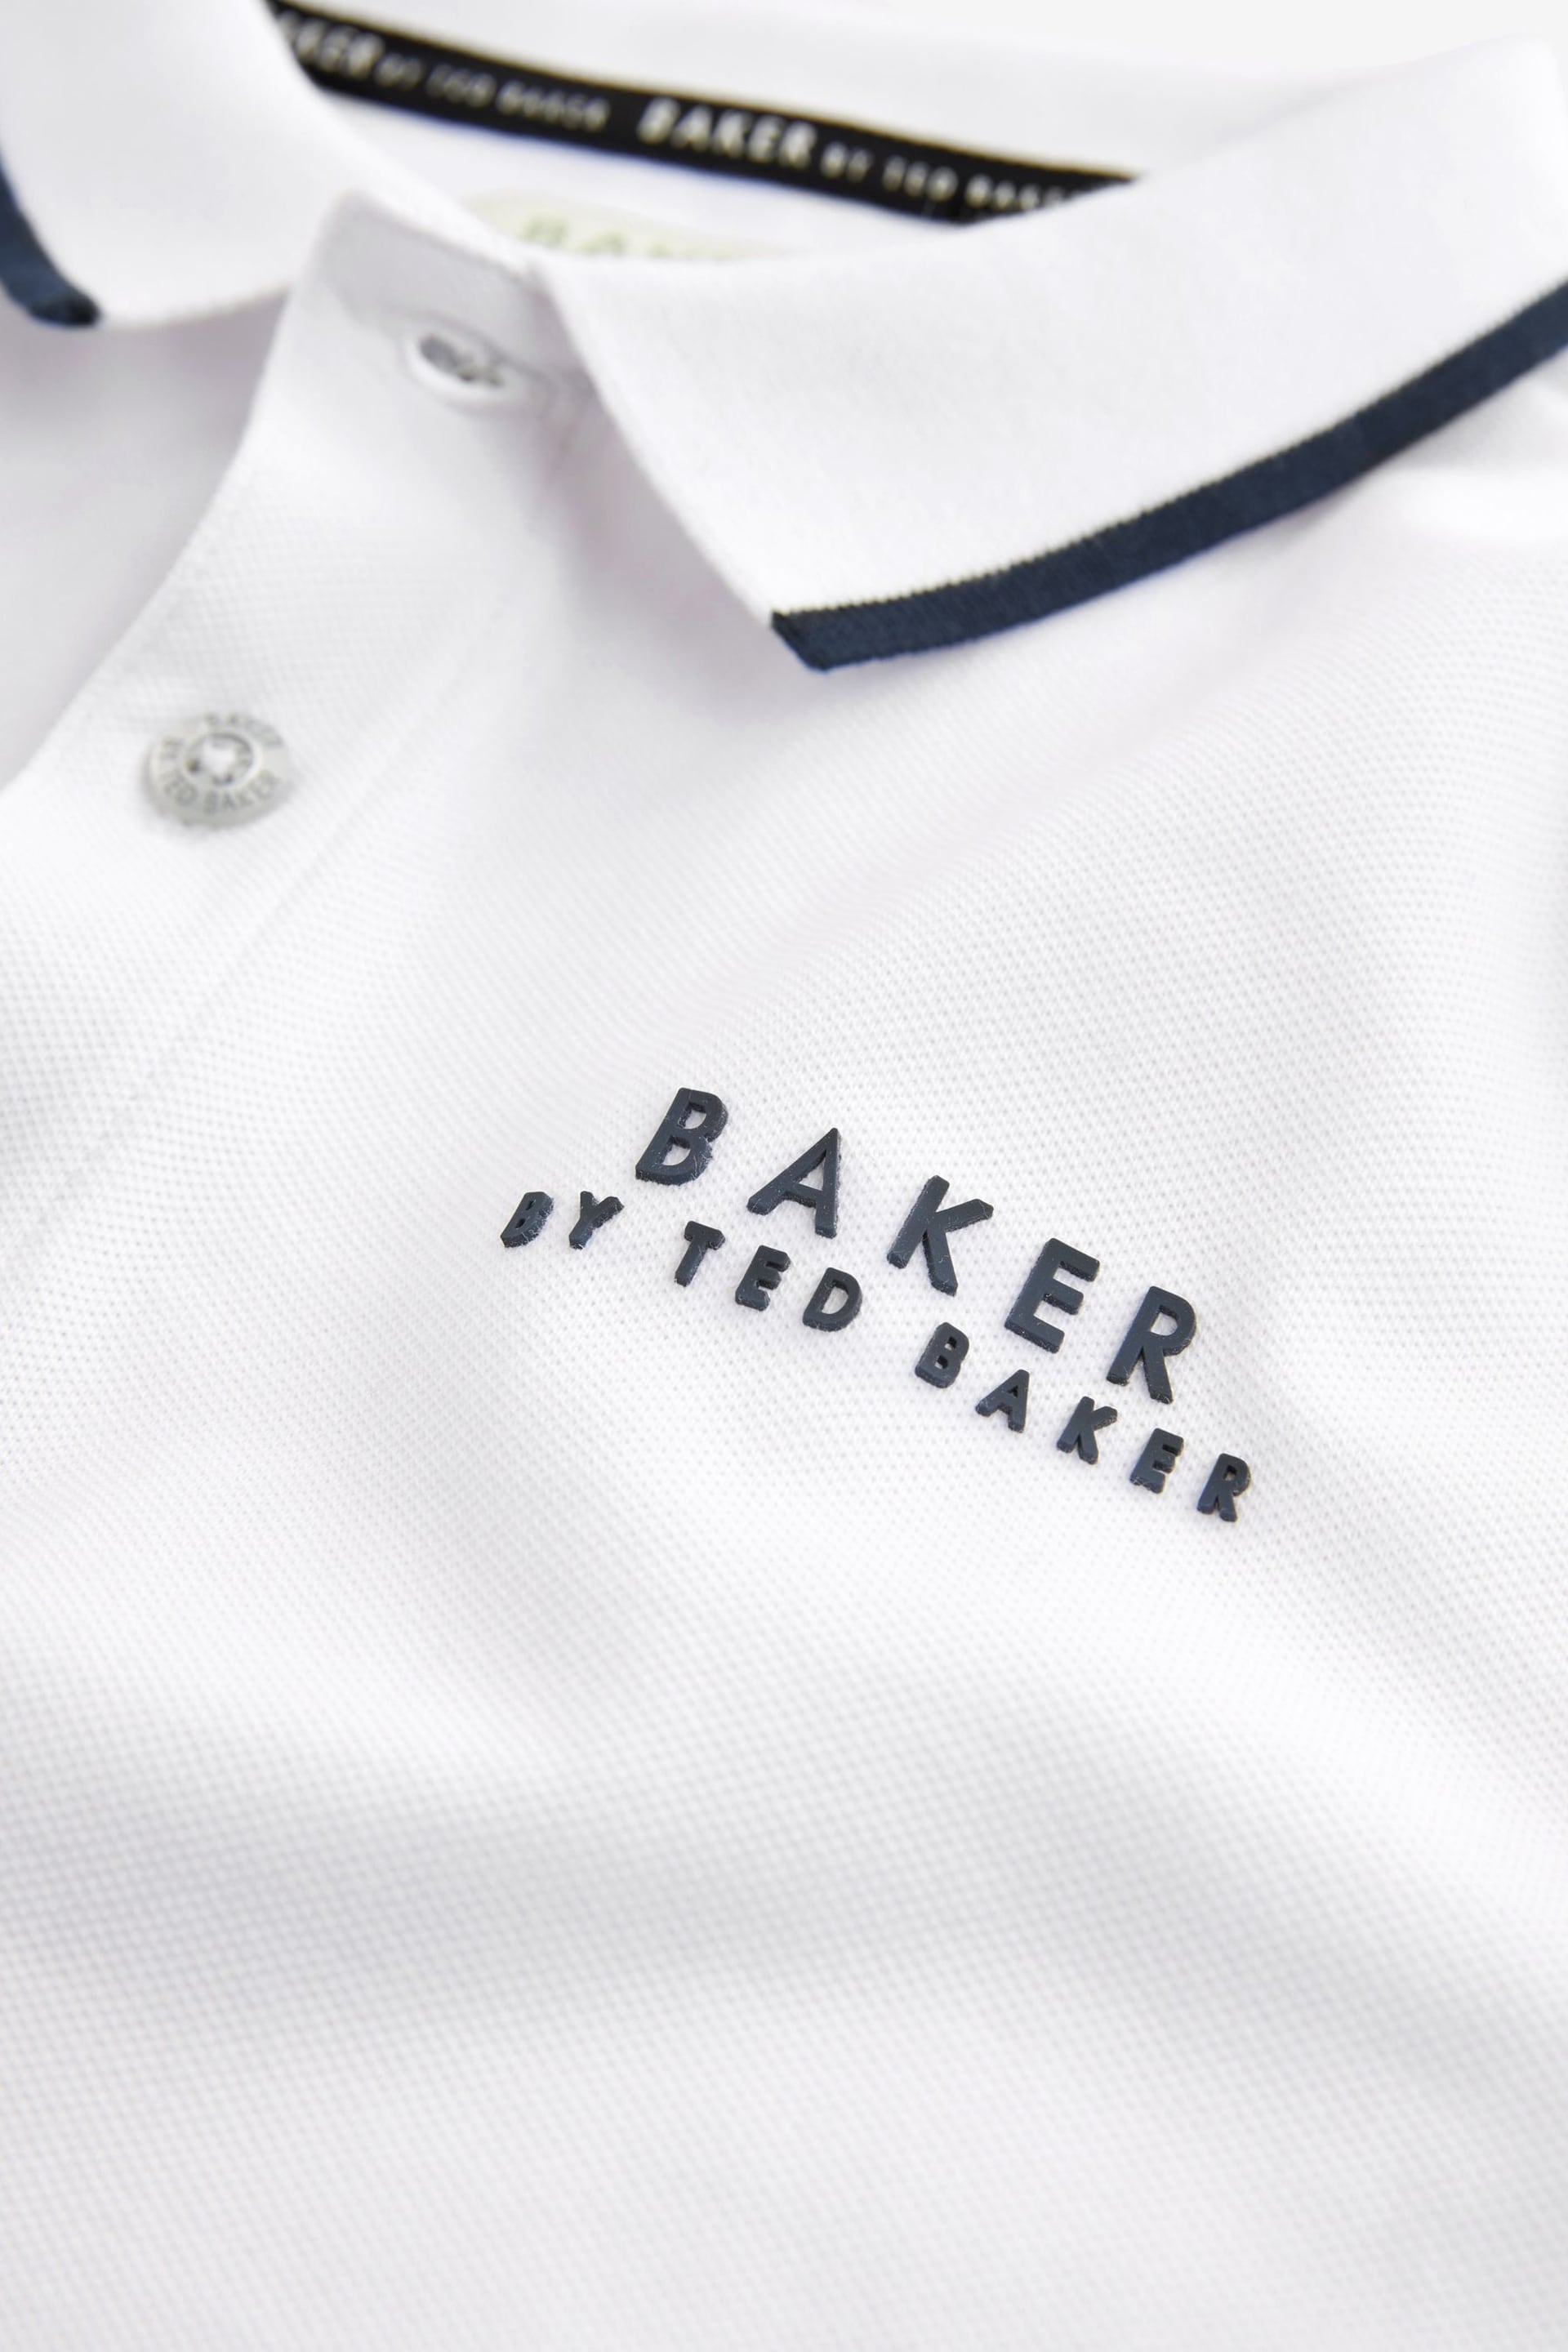 Baker by Ted Baker Polo Shirts 2 Pack - Image 6 of 7